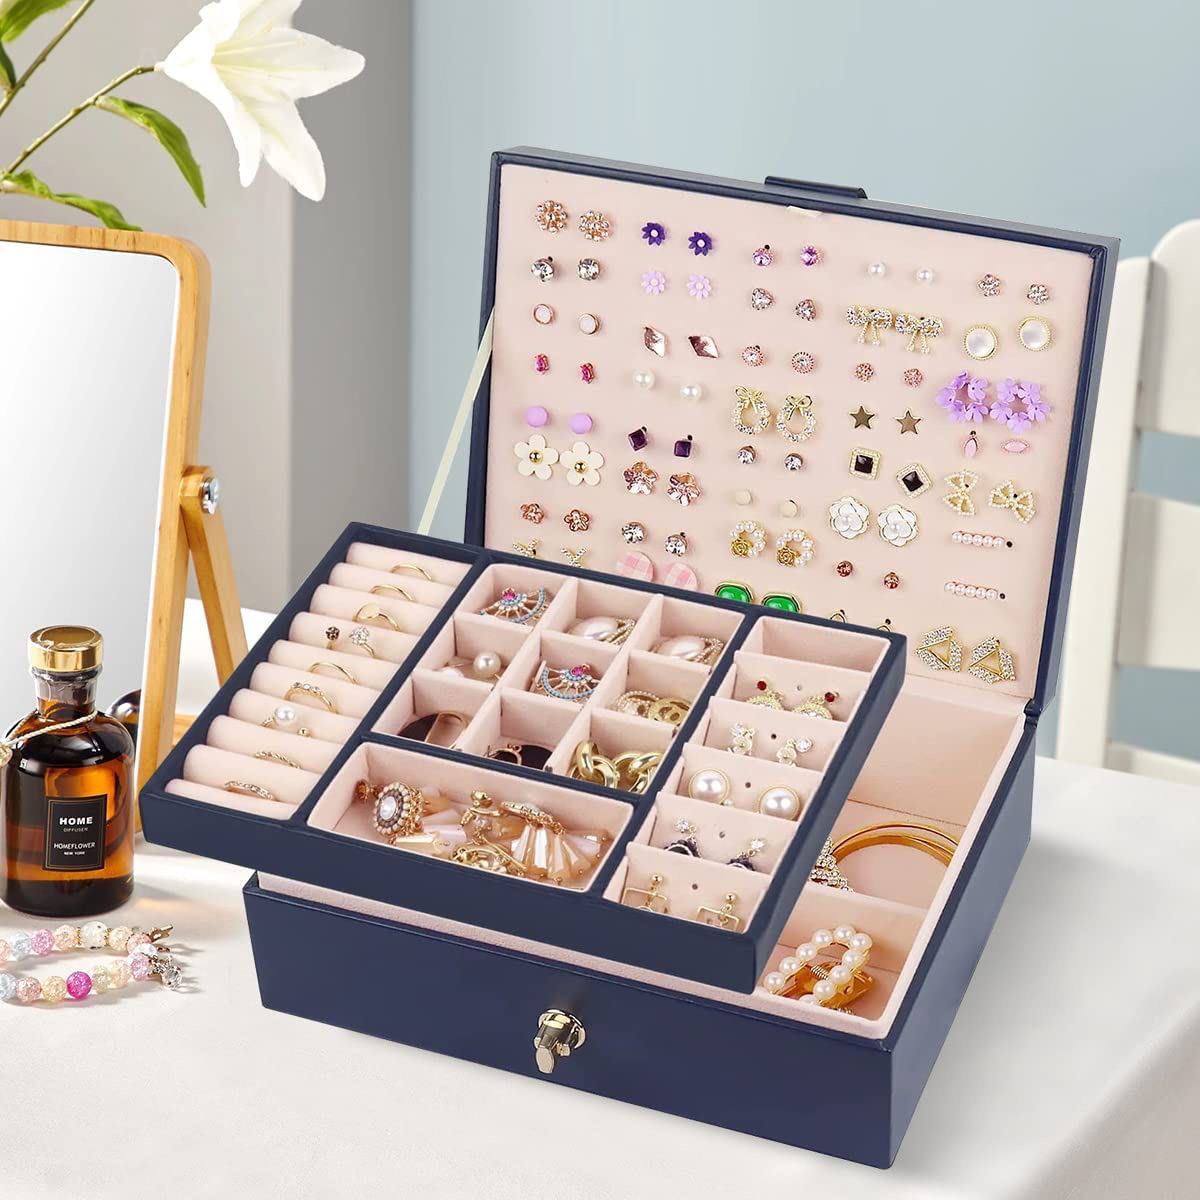 Jewelry Organizer Box, PU Leather Jewelry Boxes Necklaces Rings Earrings Holder Organizer Storage Case Double Layer Display Earrings Organizer Box Ele